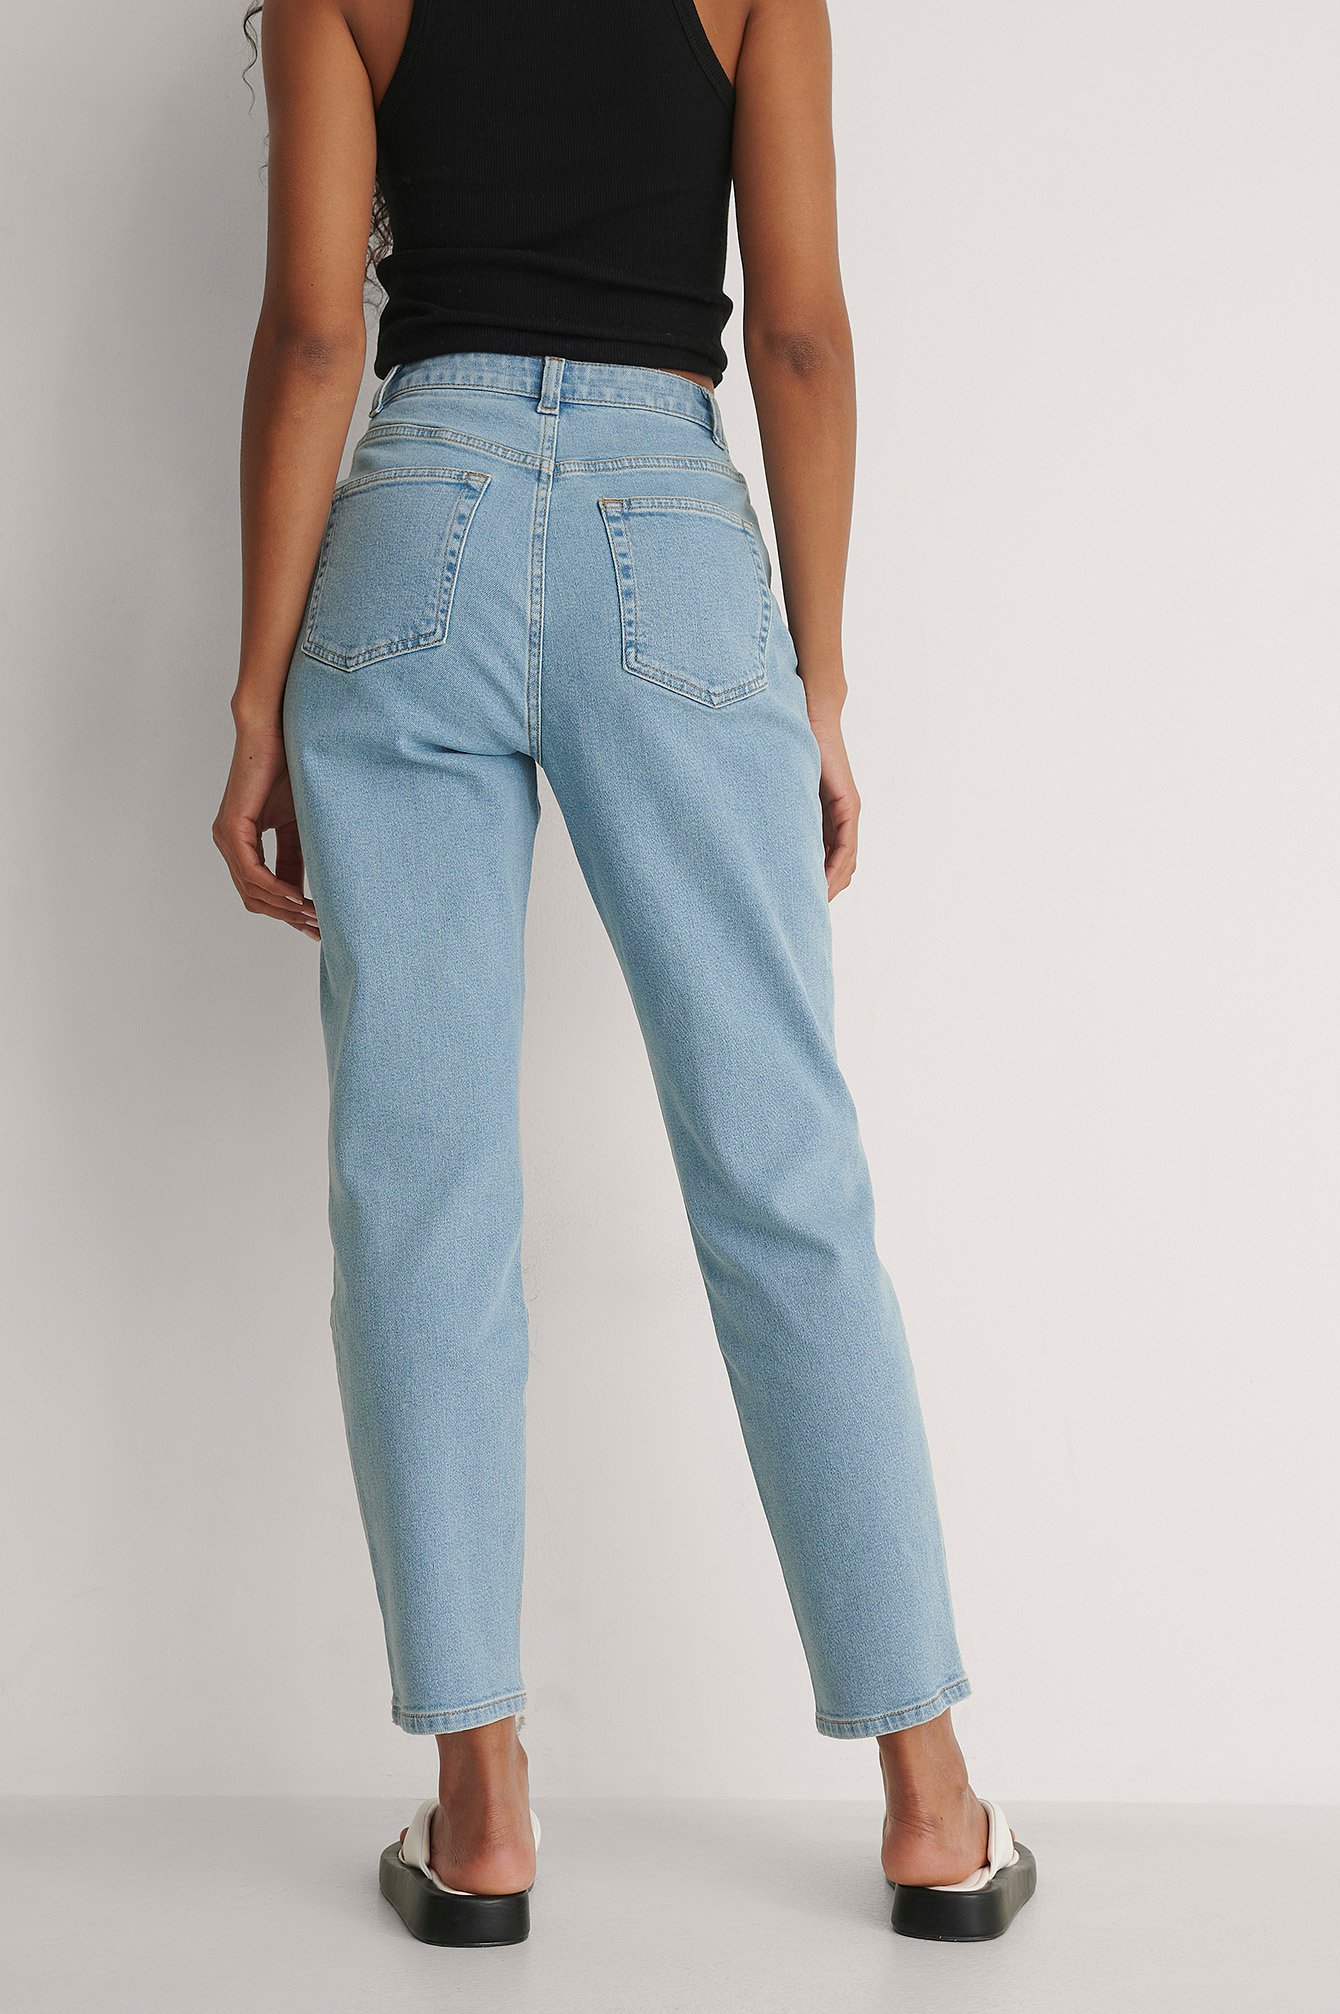 Cropped & Ankle Jeans | Women's Jeans | na-kd.com